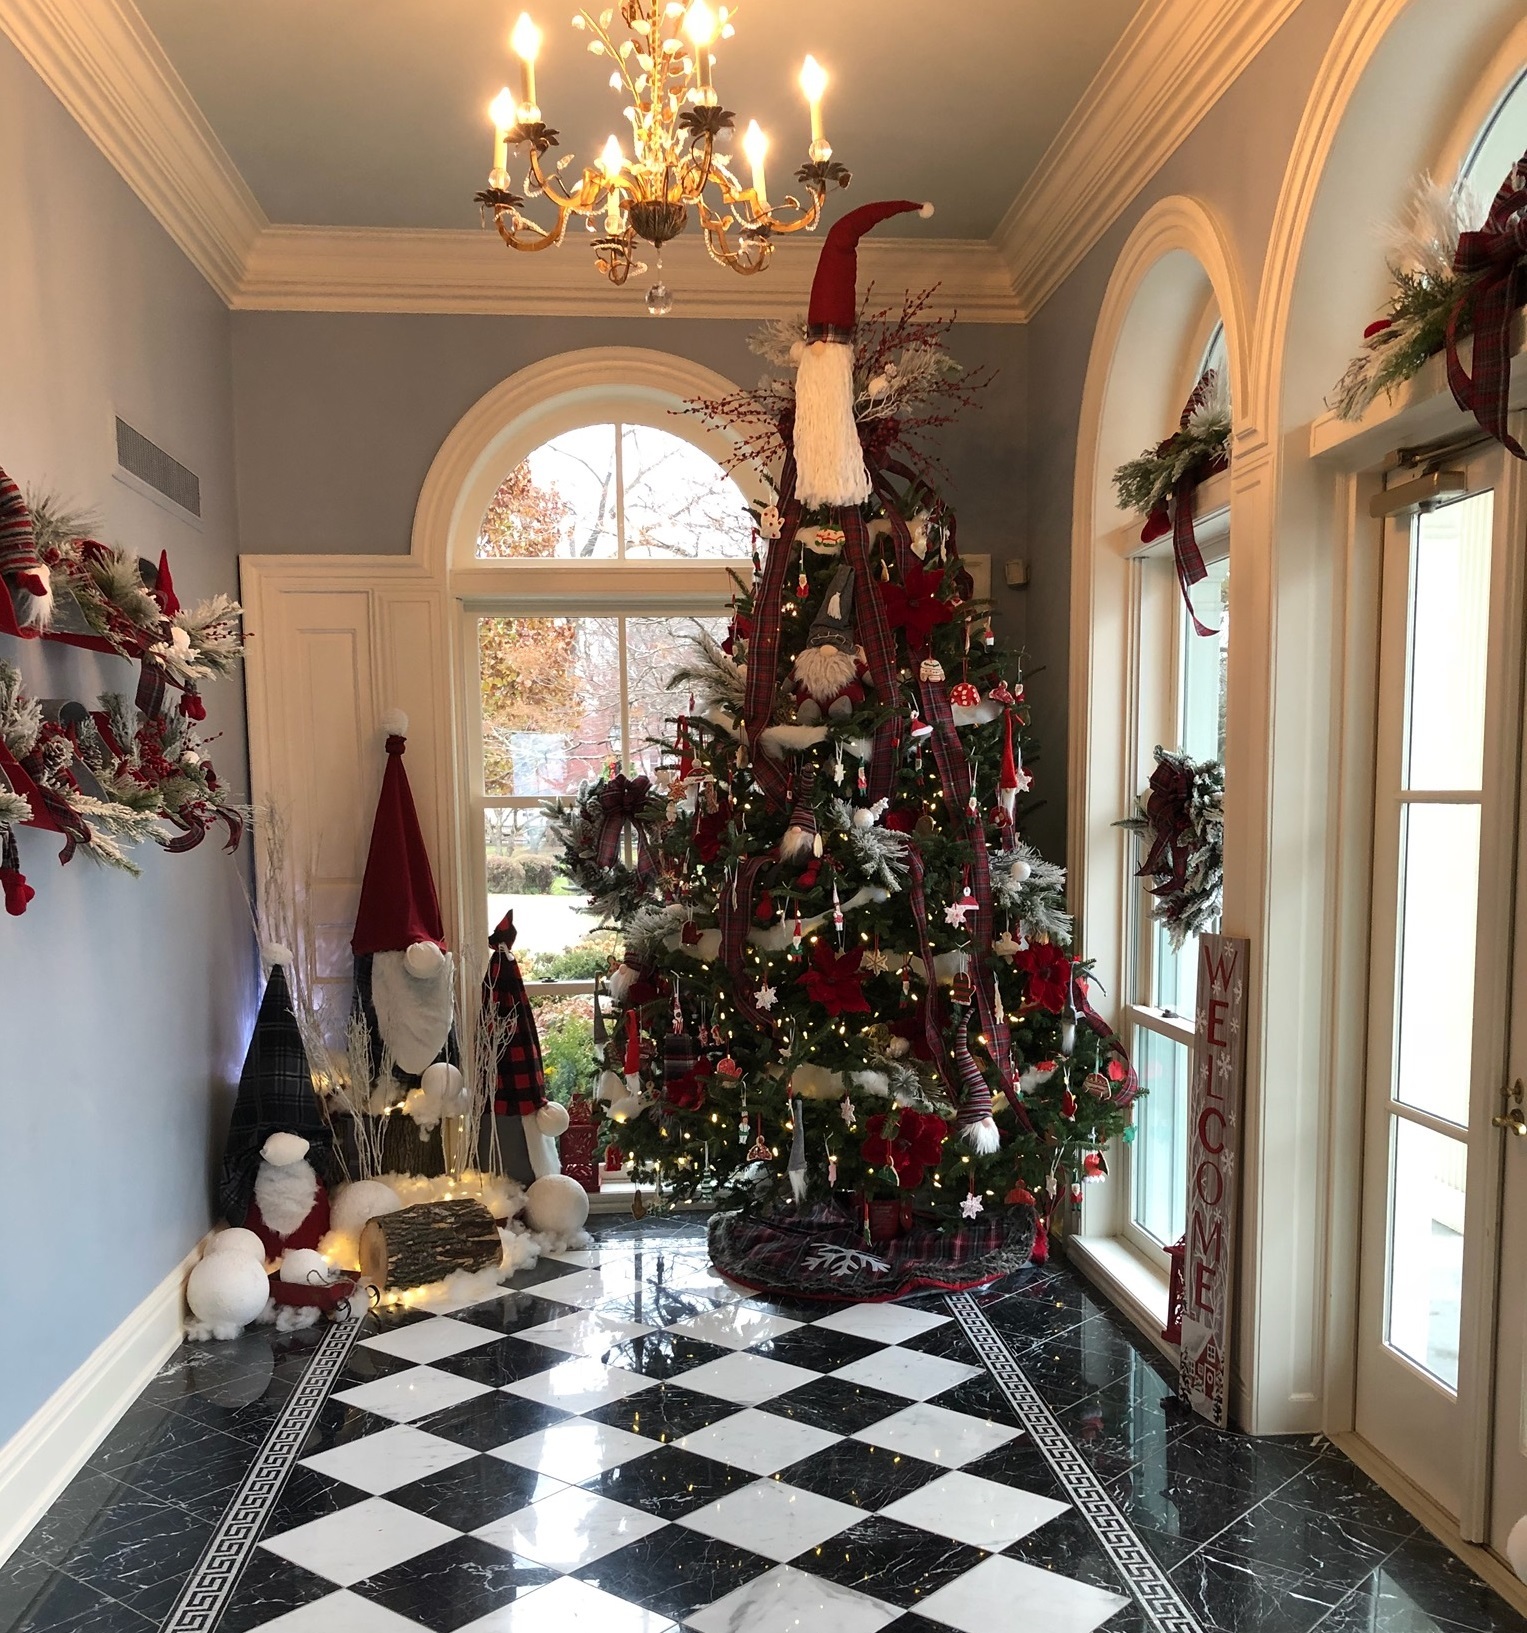 Florists from Across Wisconsin Decorate the Wisconsin Executive Residence for the 2018 Holiday Season